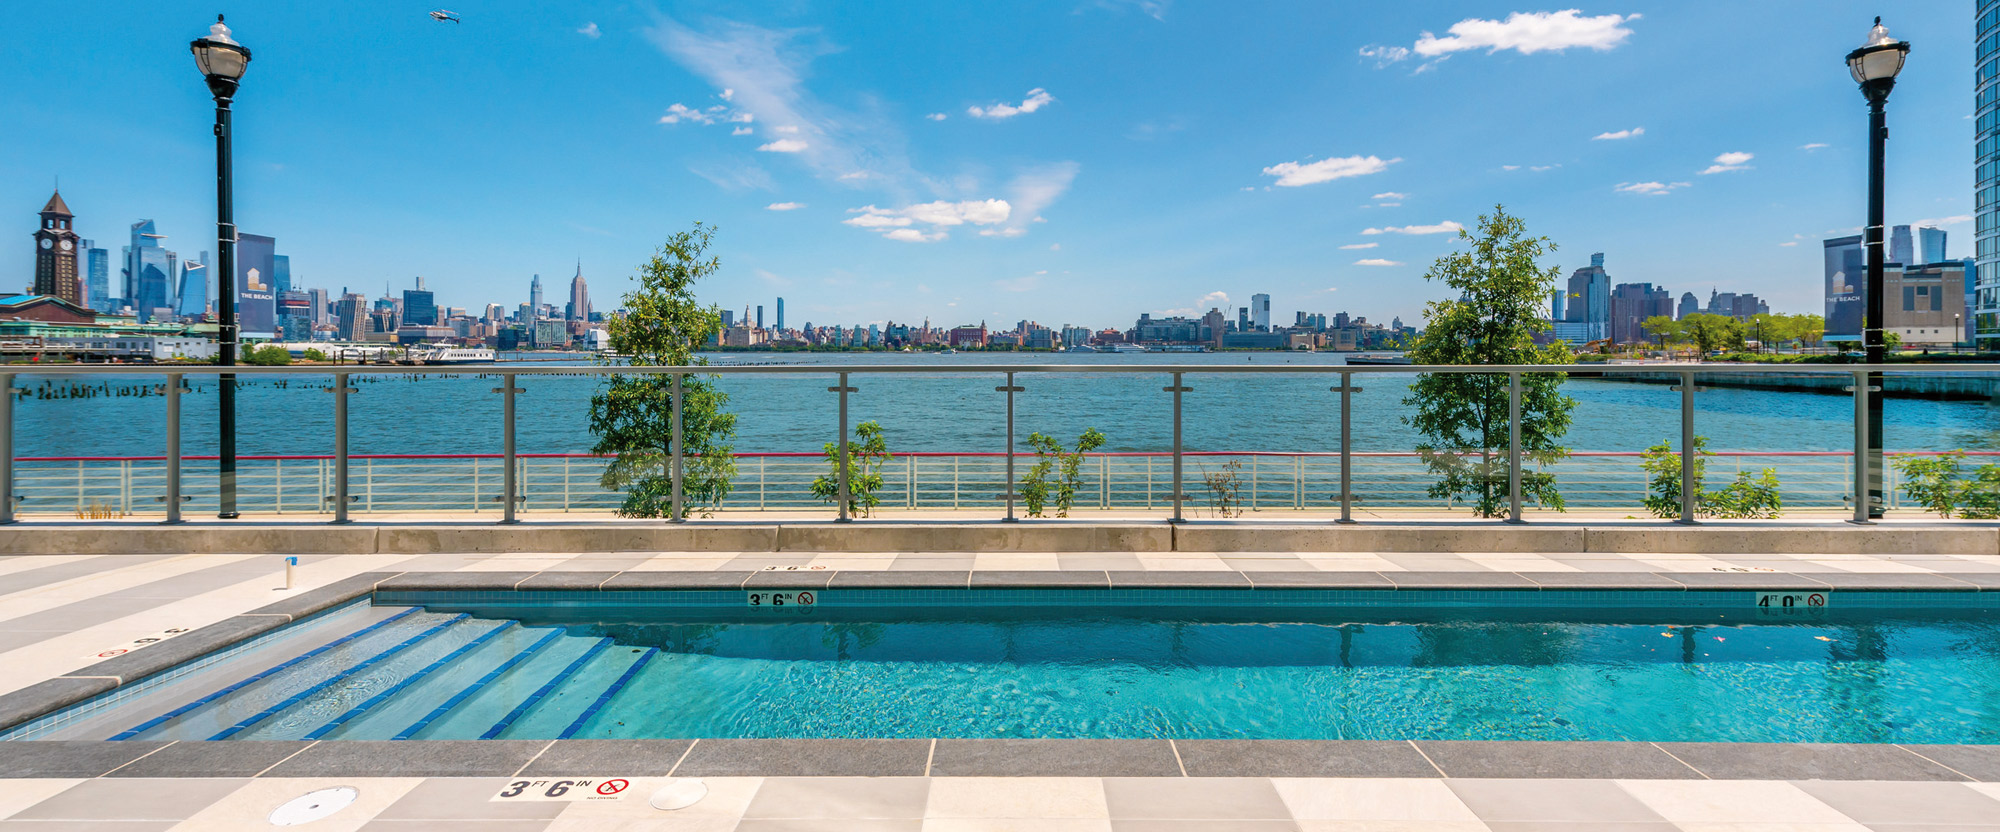 A sleek rooftop pool featuring symmetrical tilework overlooks a scenic city skyline with expansive blue skies and wispy clouds.